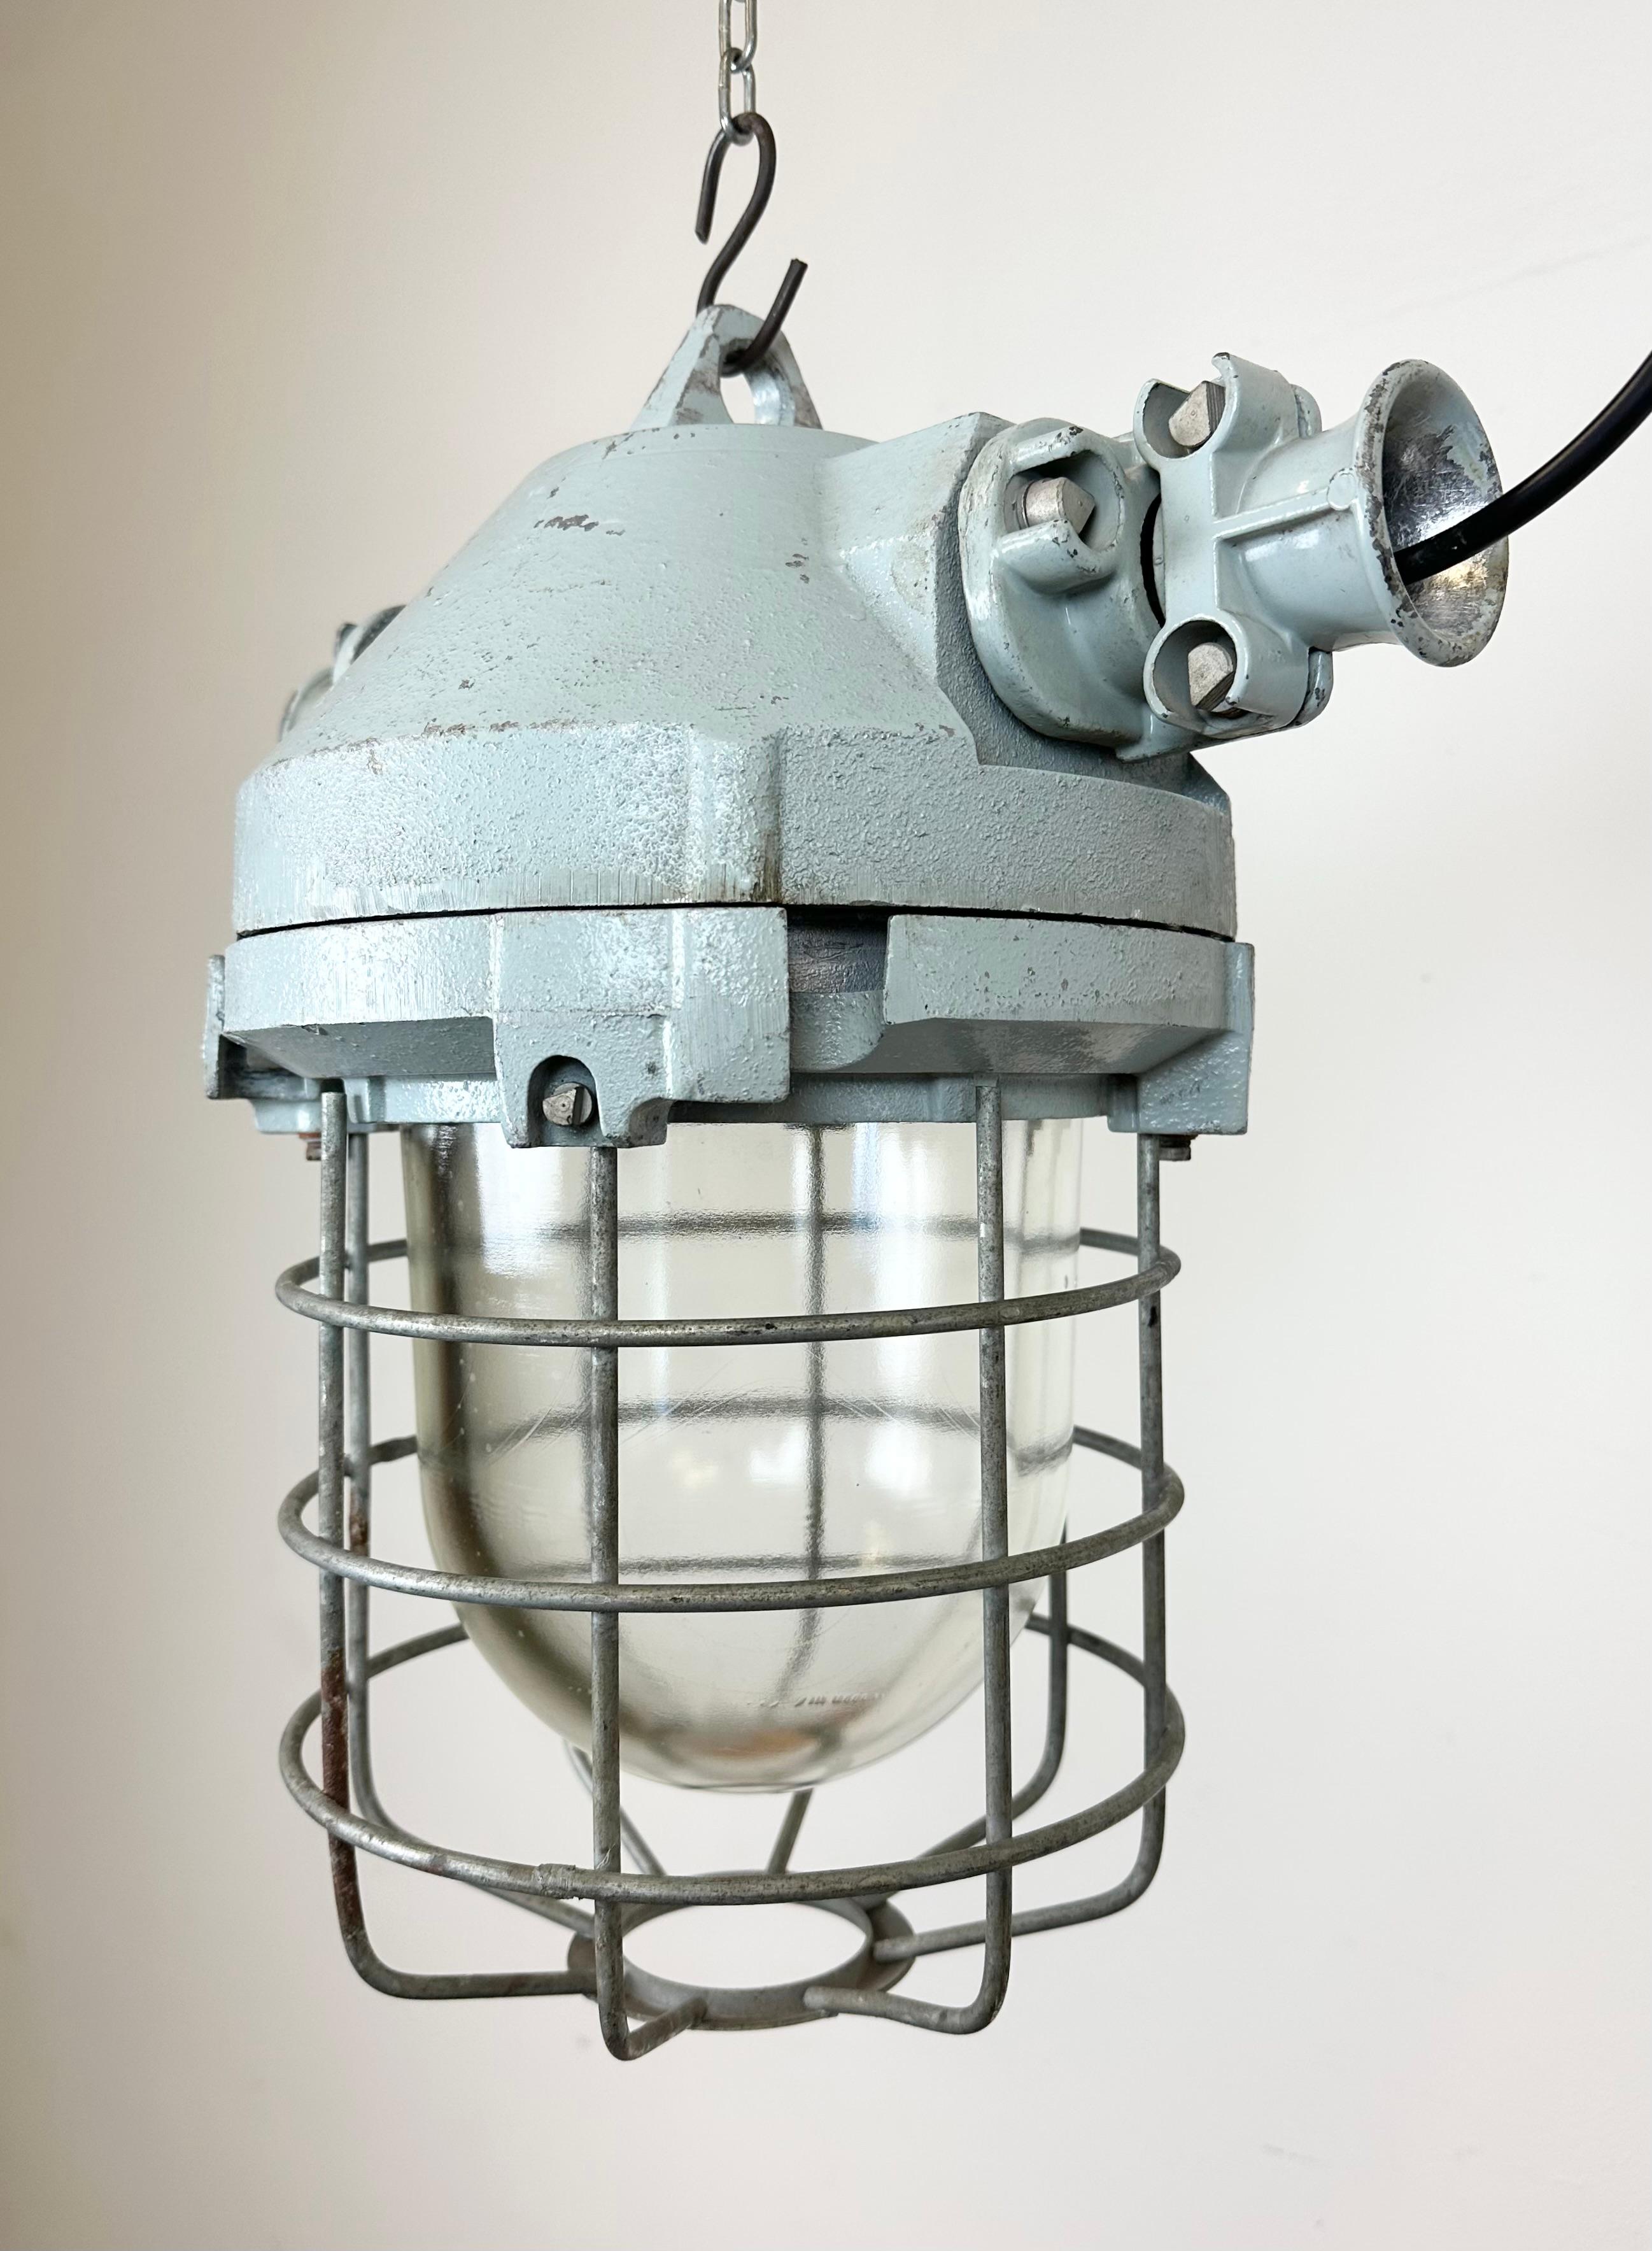 Grey Industrial Bunker Hanging Light with Iron Cage from Elektrosvit, 1970s For Sale 1